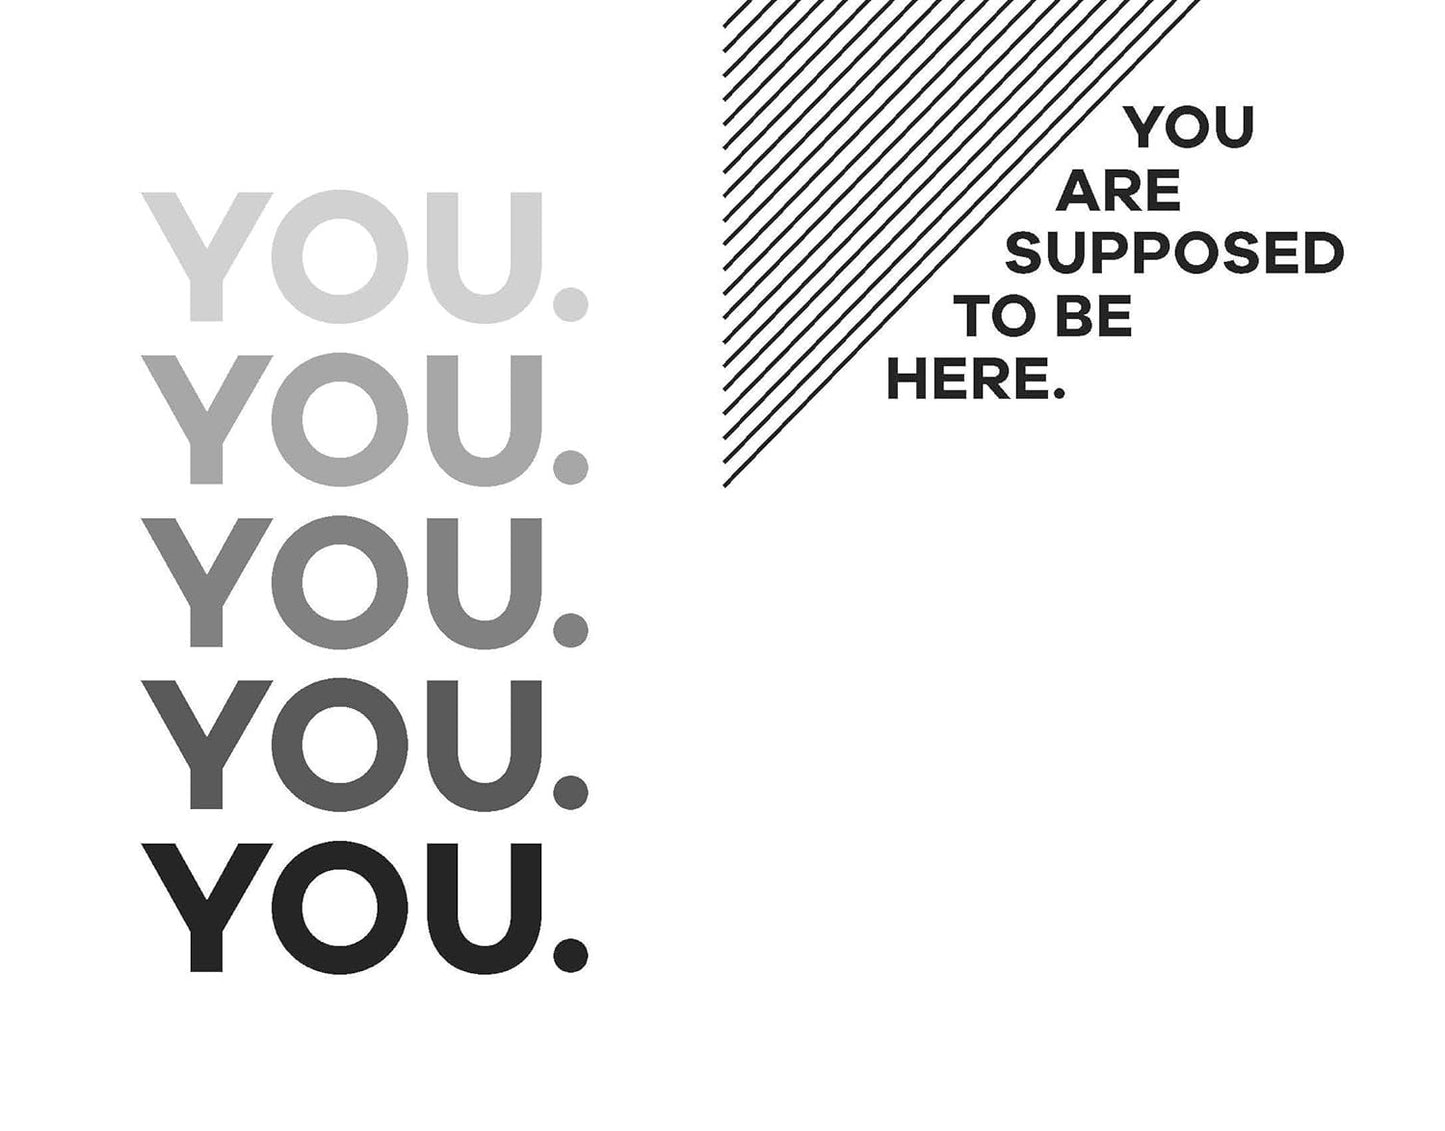 Graphic image featuring bold text that repeatedly says "What a Time to Journal: Work Out Why You Are Already Enough" in a vertical line on the left, and on the right, a statement "you are supposed to be here." next to a diagonal striped triangle by Chidera Eggerue (Author)